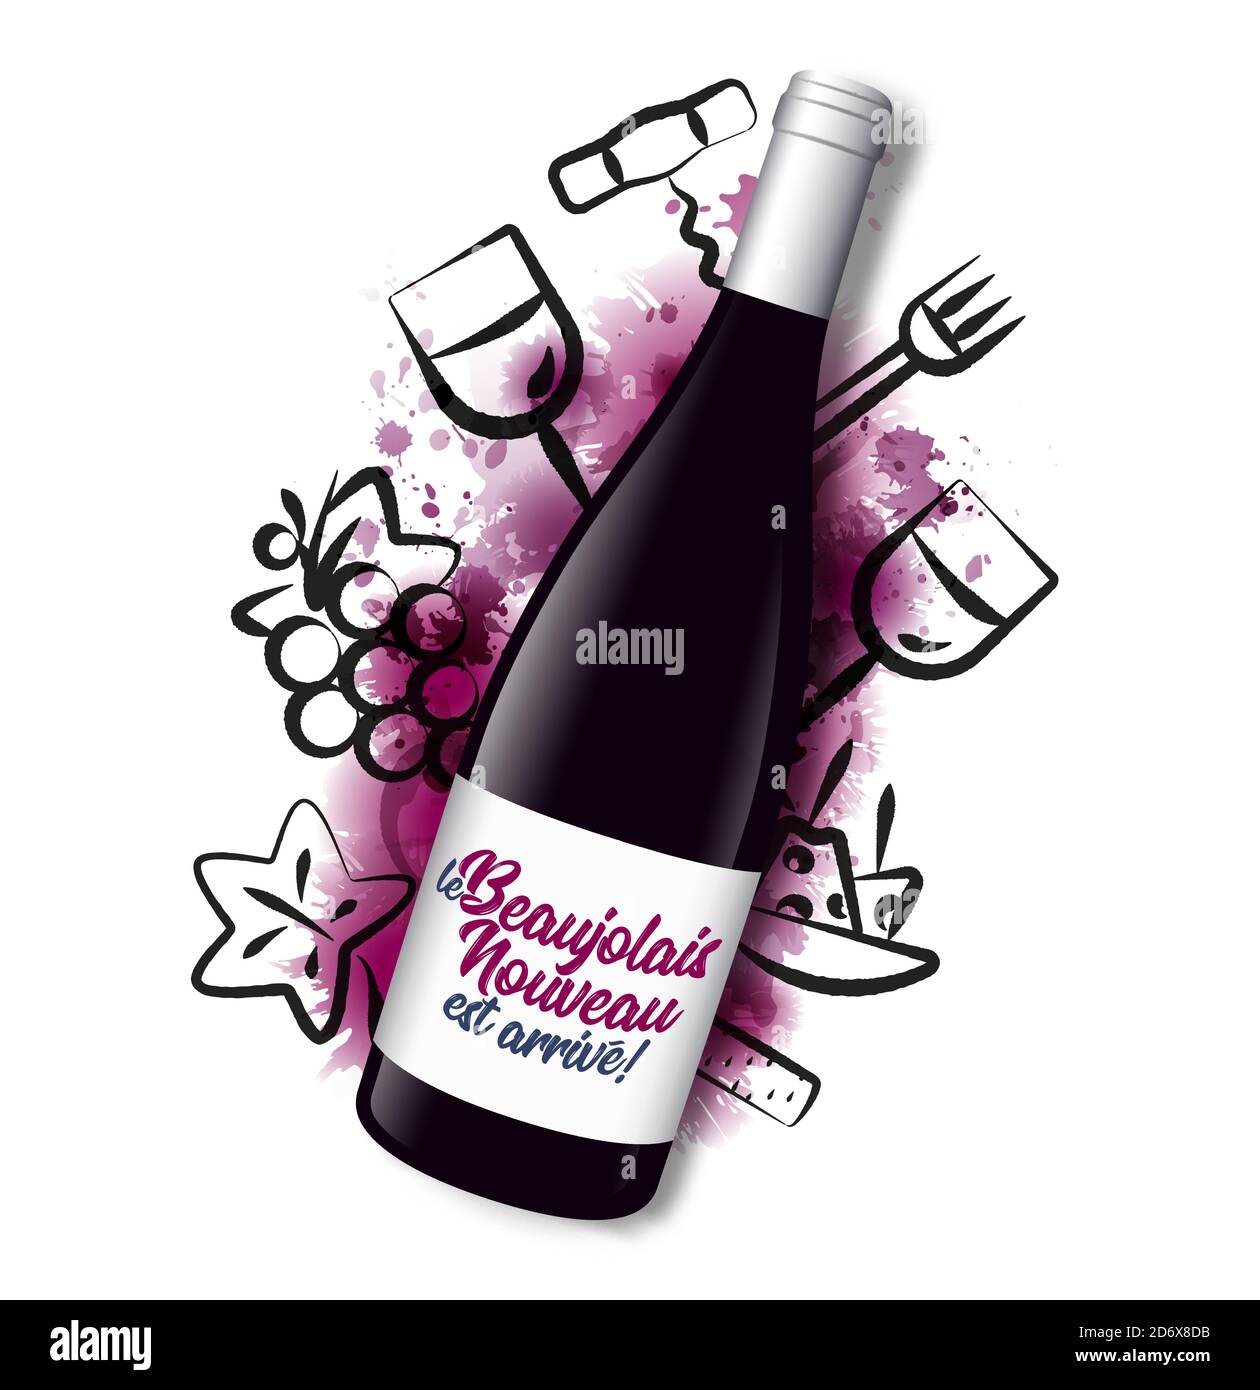 Realistic illustration of a wine bottle with the text in French 'le Beaujolais Nouveau est arrivé', the new Beaujolais has arrived. In the background Stock Vector